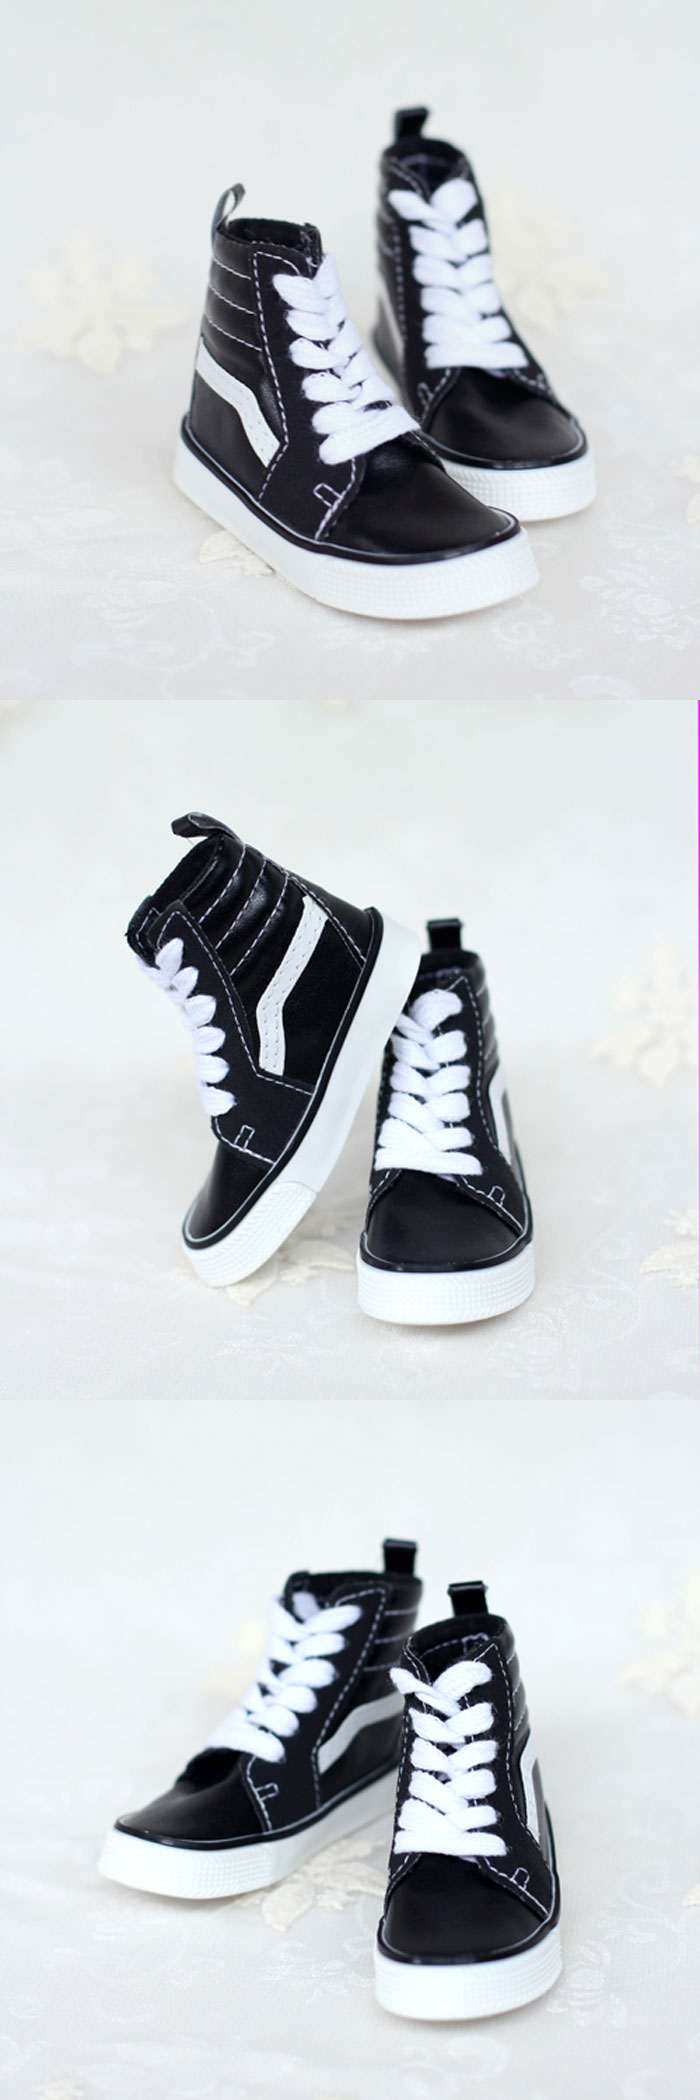 Bjd Shoes Boy/Girl Leisure Shoes for SD Size Ball-jointed Doll_SHOES ...